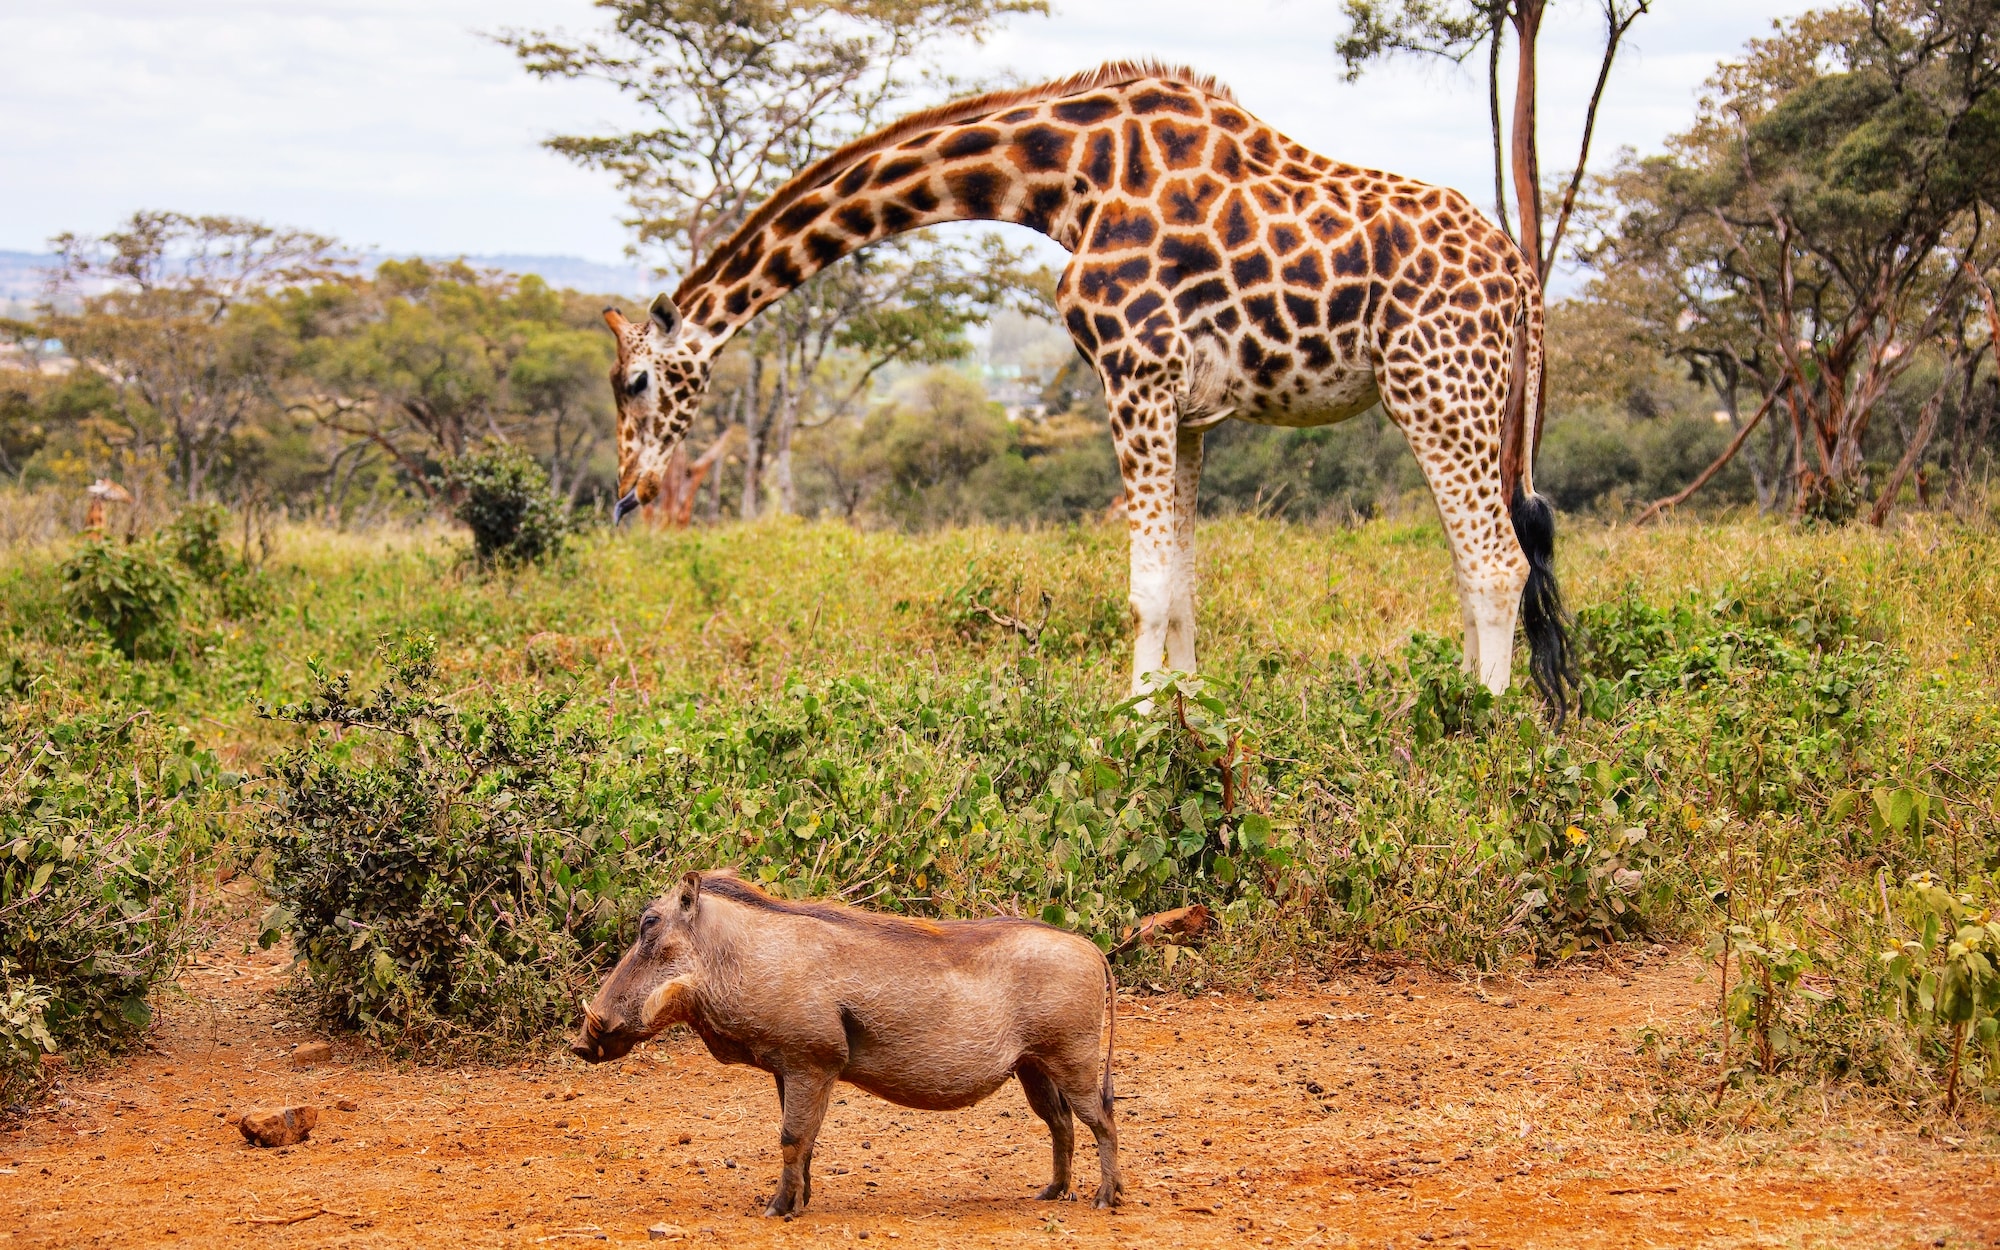 A rothschild giraffe browses at low shrubs with a warthog standing in the foreground